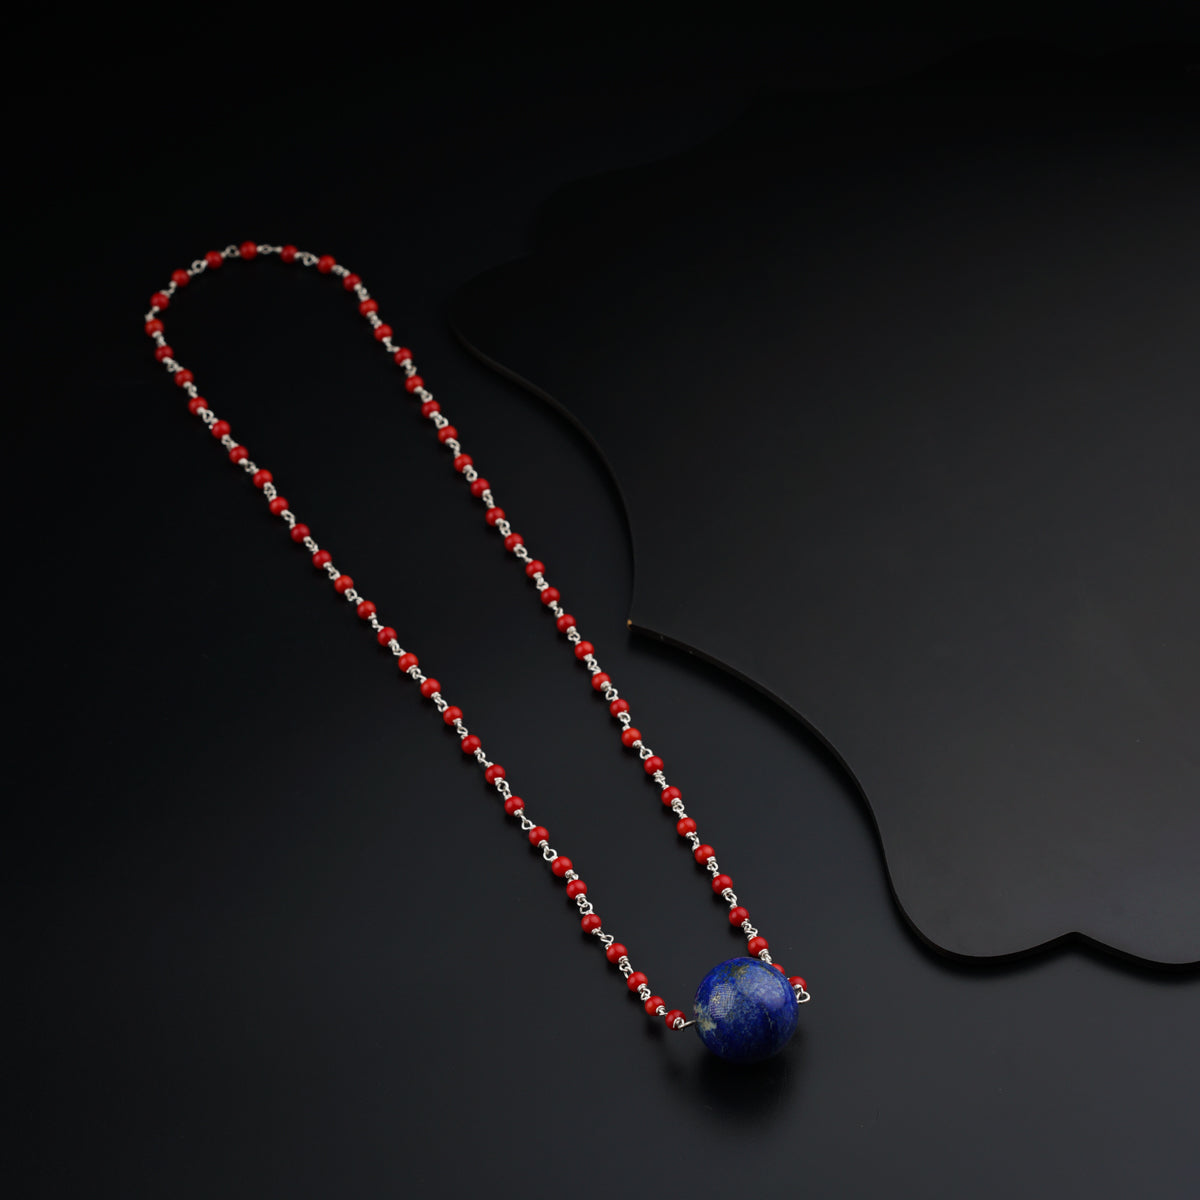 a red beaded necklace with a blue bead on a black background